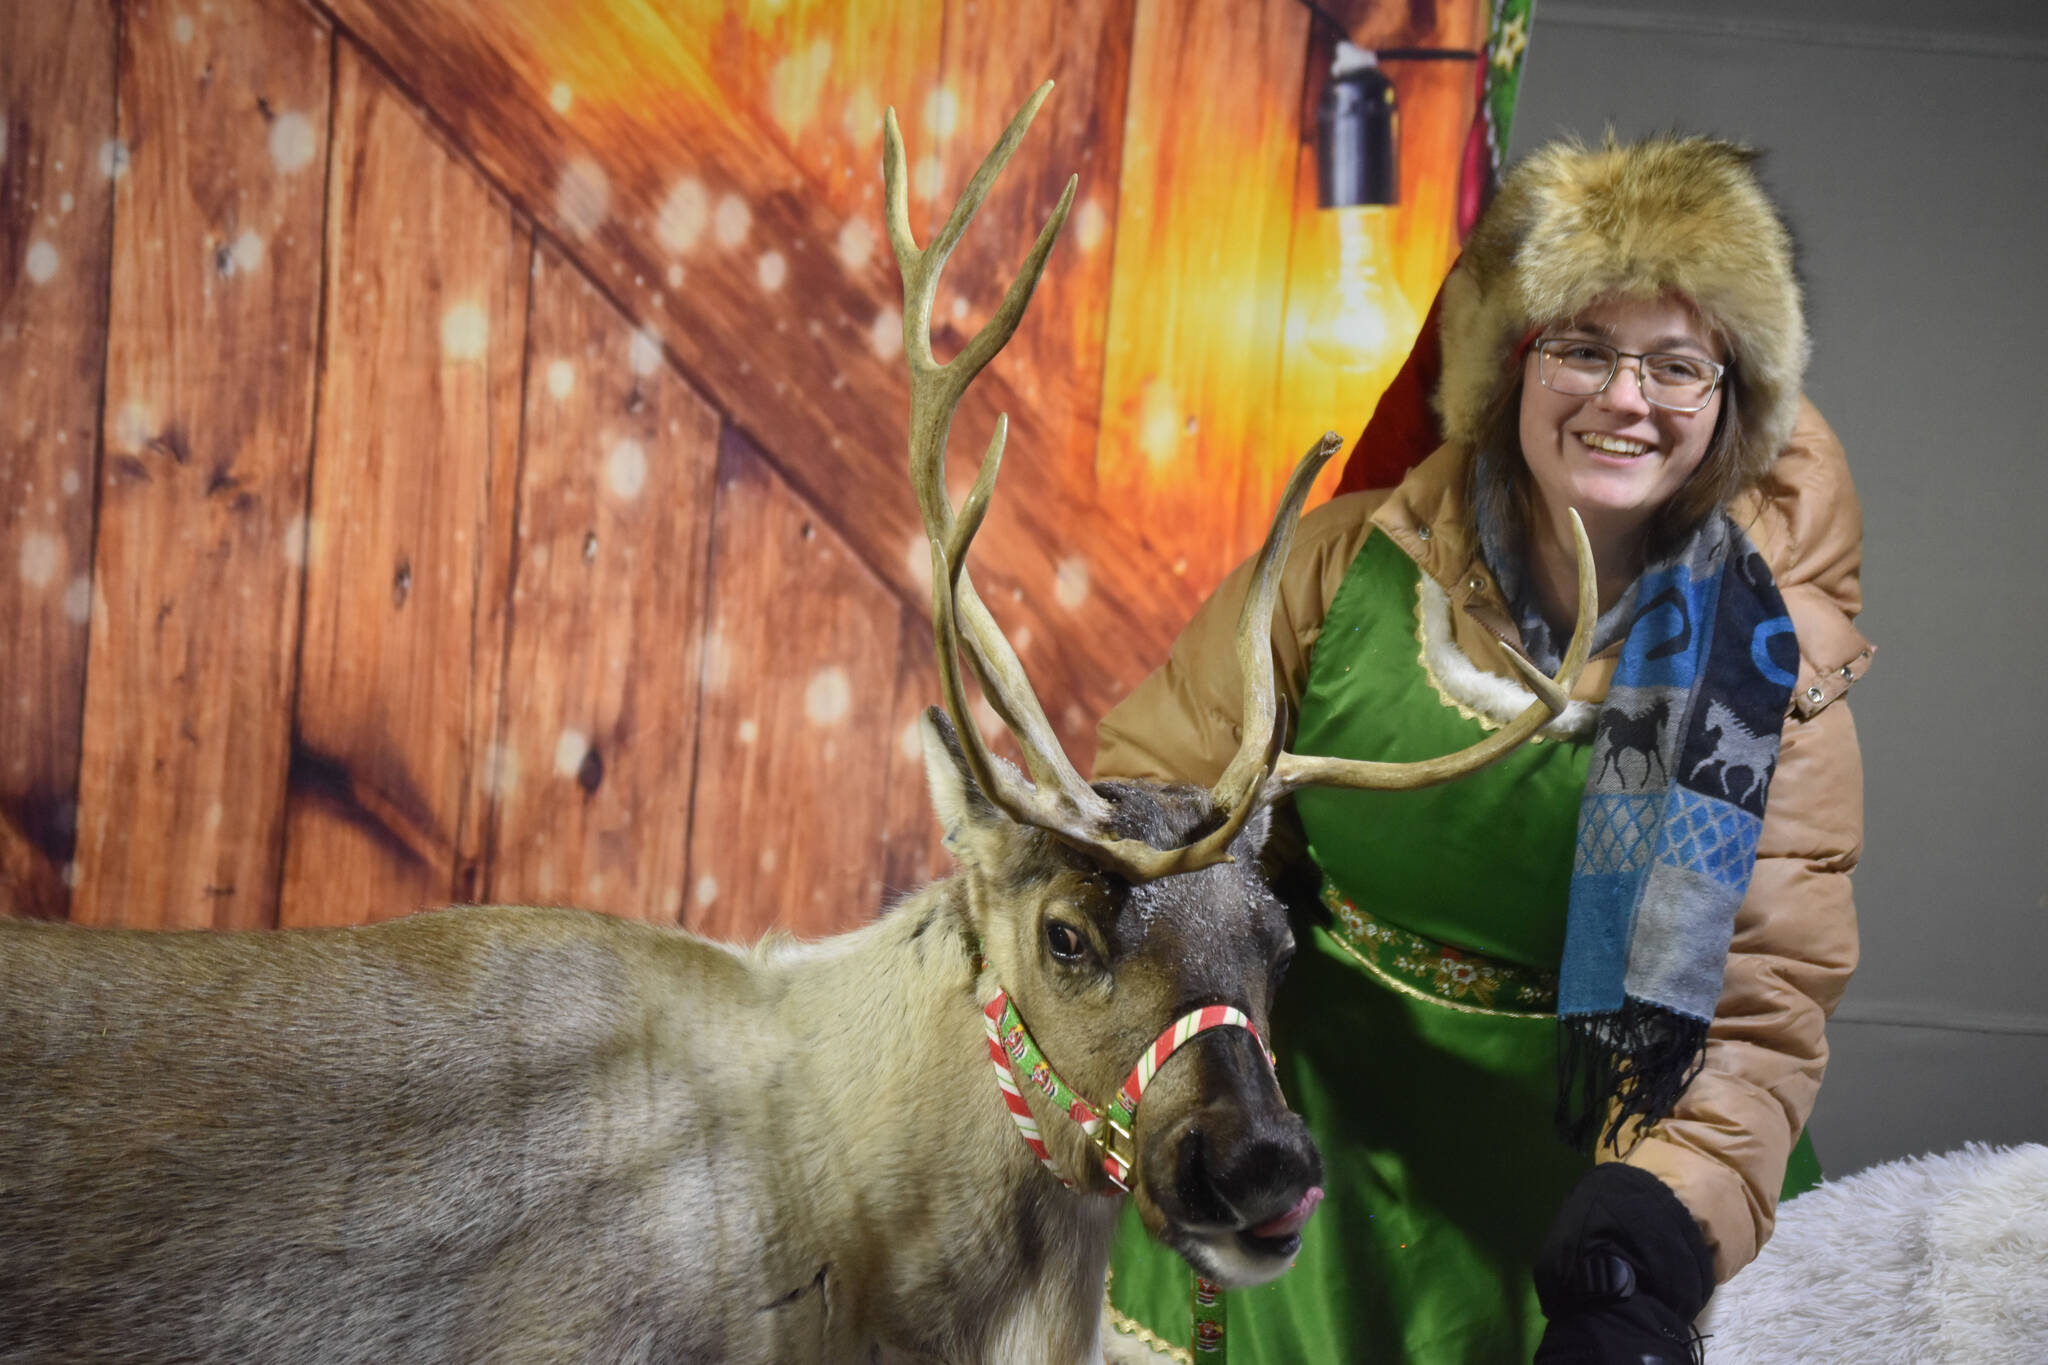 Jenna Bedford brings one of Santa’s reindeer out to meet the children during Christmas in the Park festivities on Saturday, Dec. 3, 2022, at Soldotna Creek Park in Soldotna, Alaska. (Jake Dye/Peninsula Clarion)